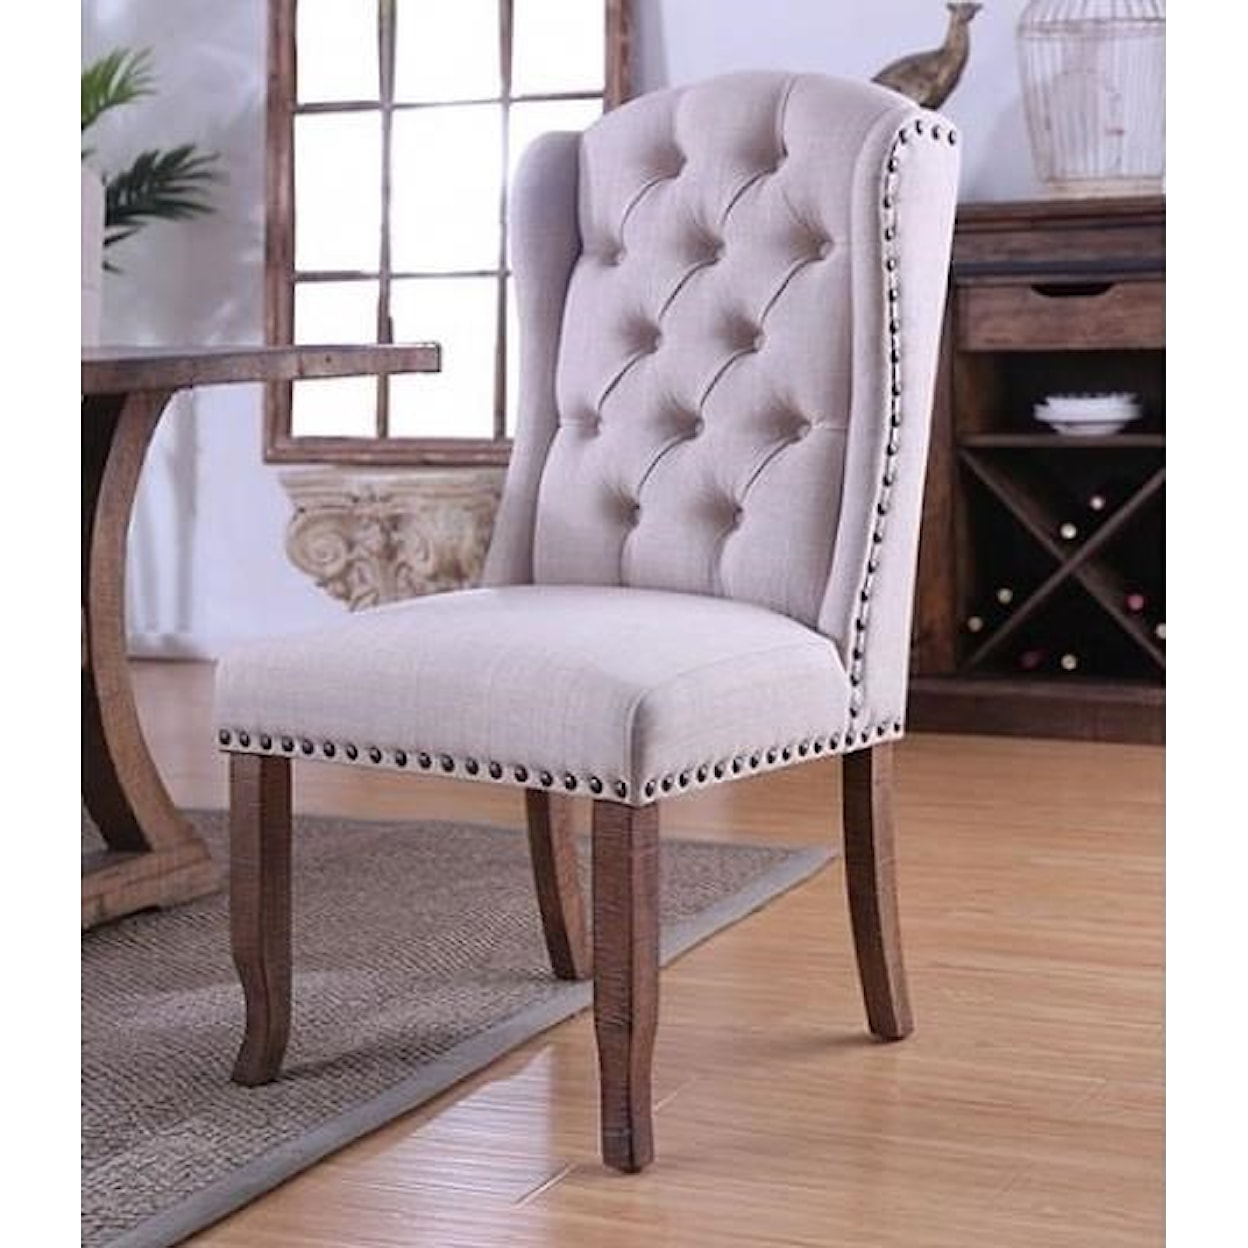 Furniture of America Gianna Wingback Chair, 2 Pack